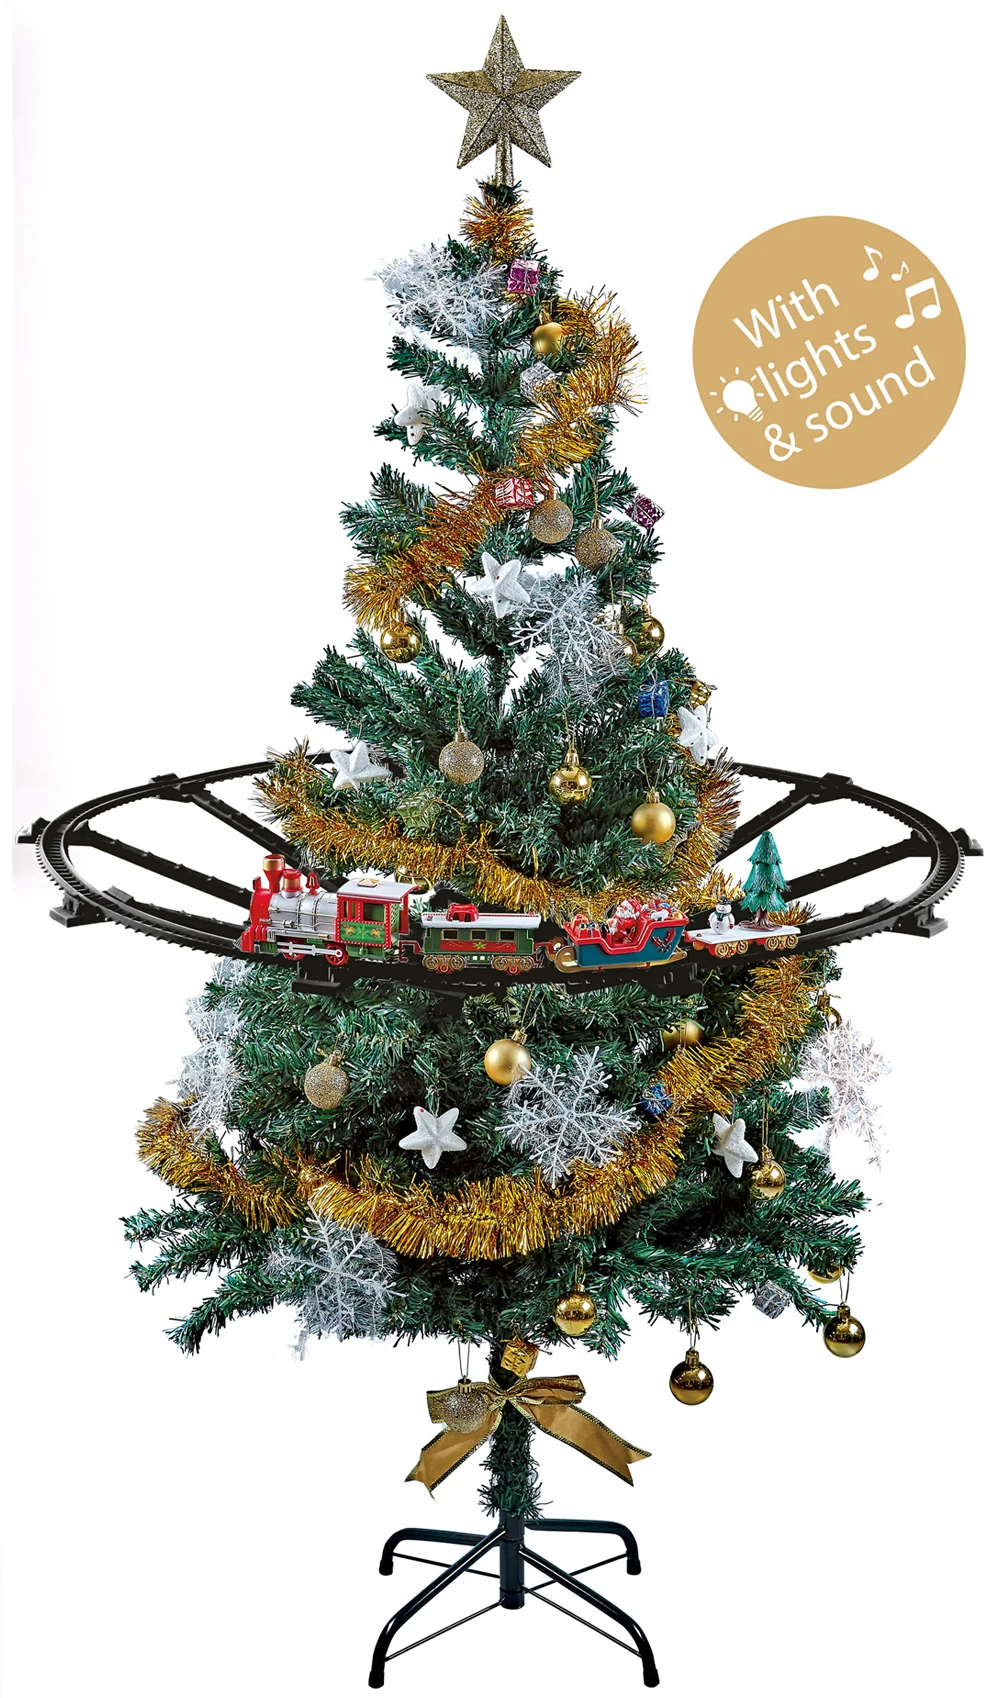 Electric Christmas Train Track Set Light Musical Sound-Around Tree Kids Toy Gift 